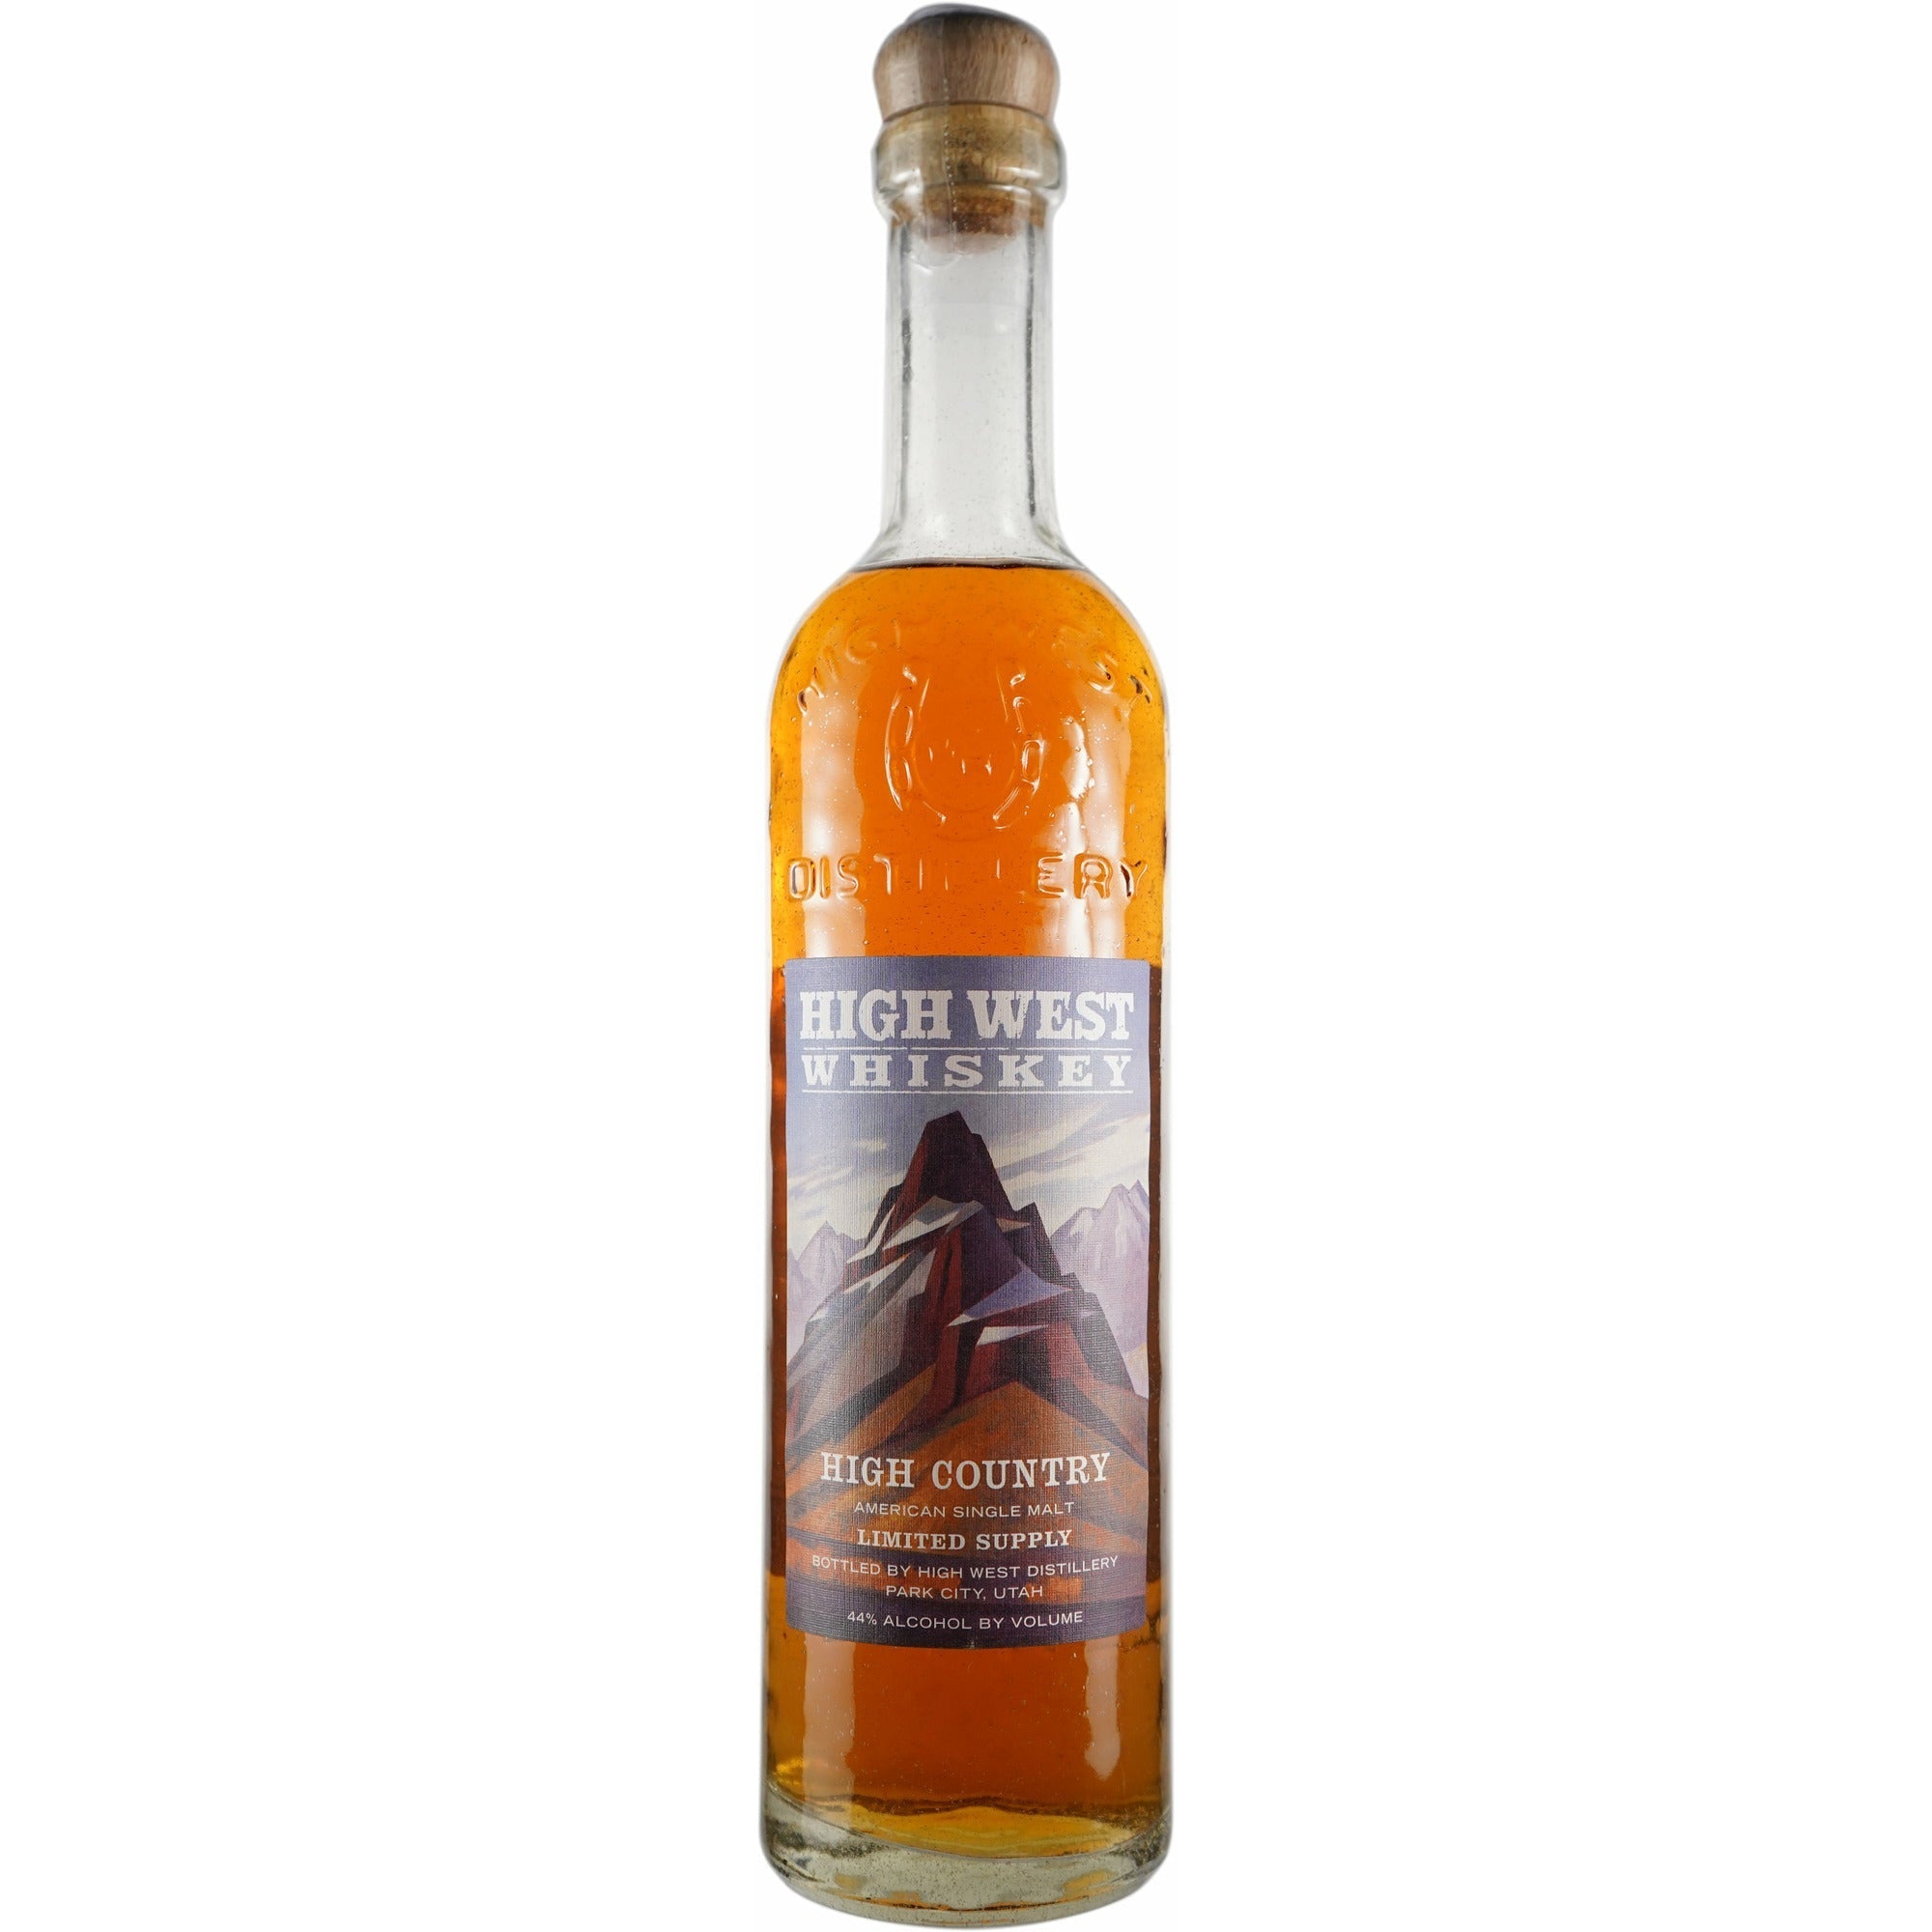 High West High Country Limited Supply Single Malt Whiskey 750ml